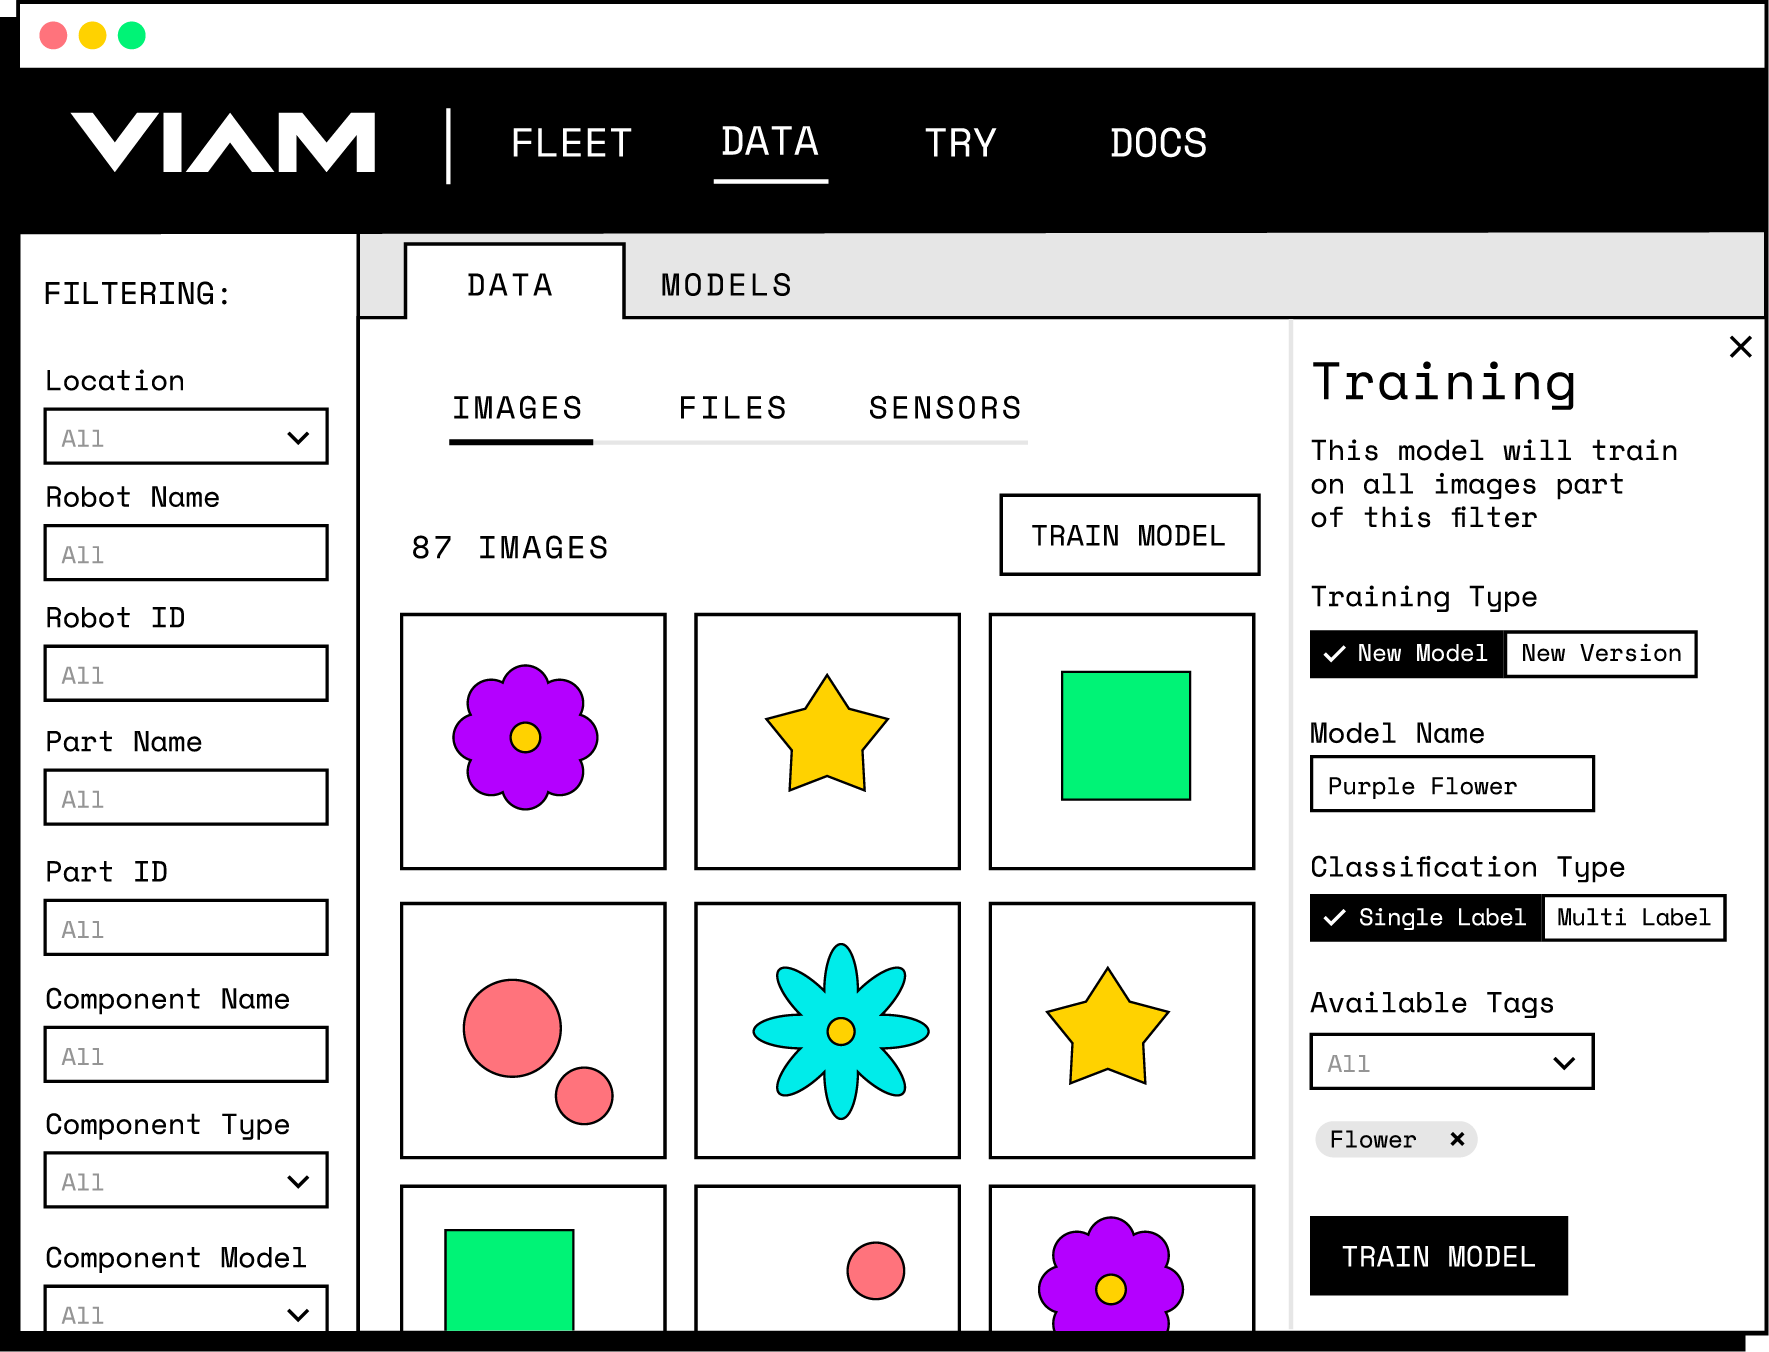 The data page of the Viam app showing a gallery of the images captured from the Viam Rover.